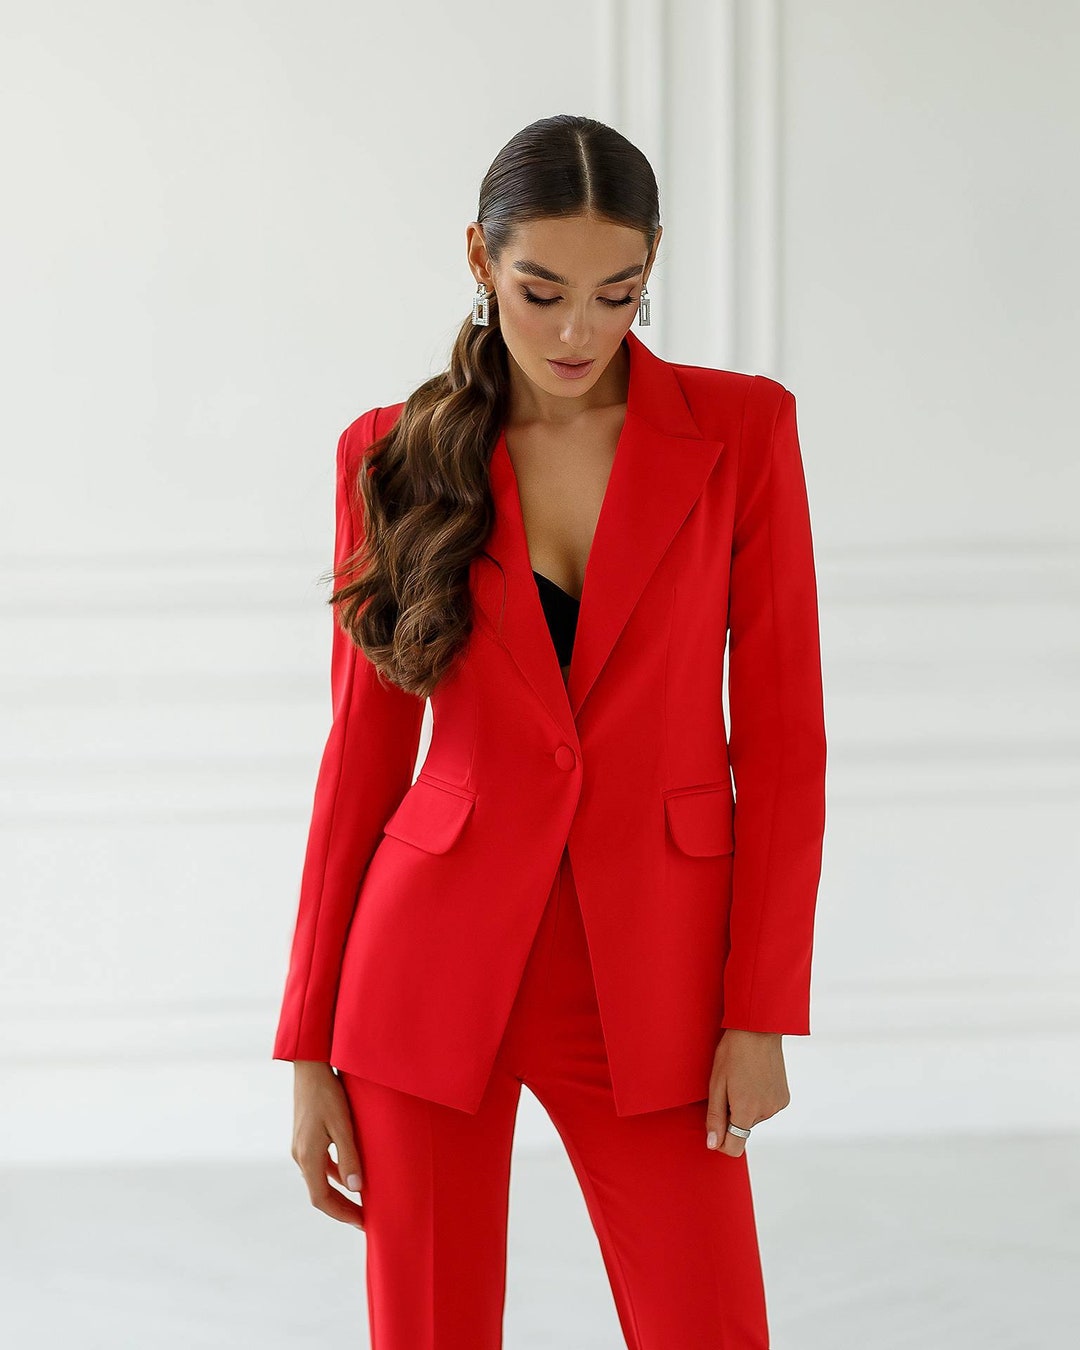 Red Formal Pantsuit for Women, Red Pants Suit for Office, Business Suit ...